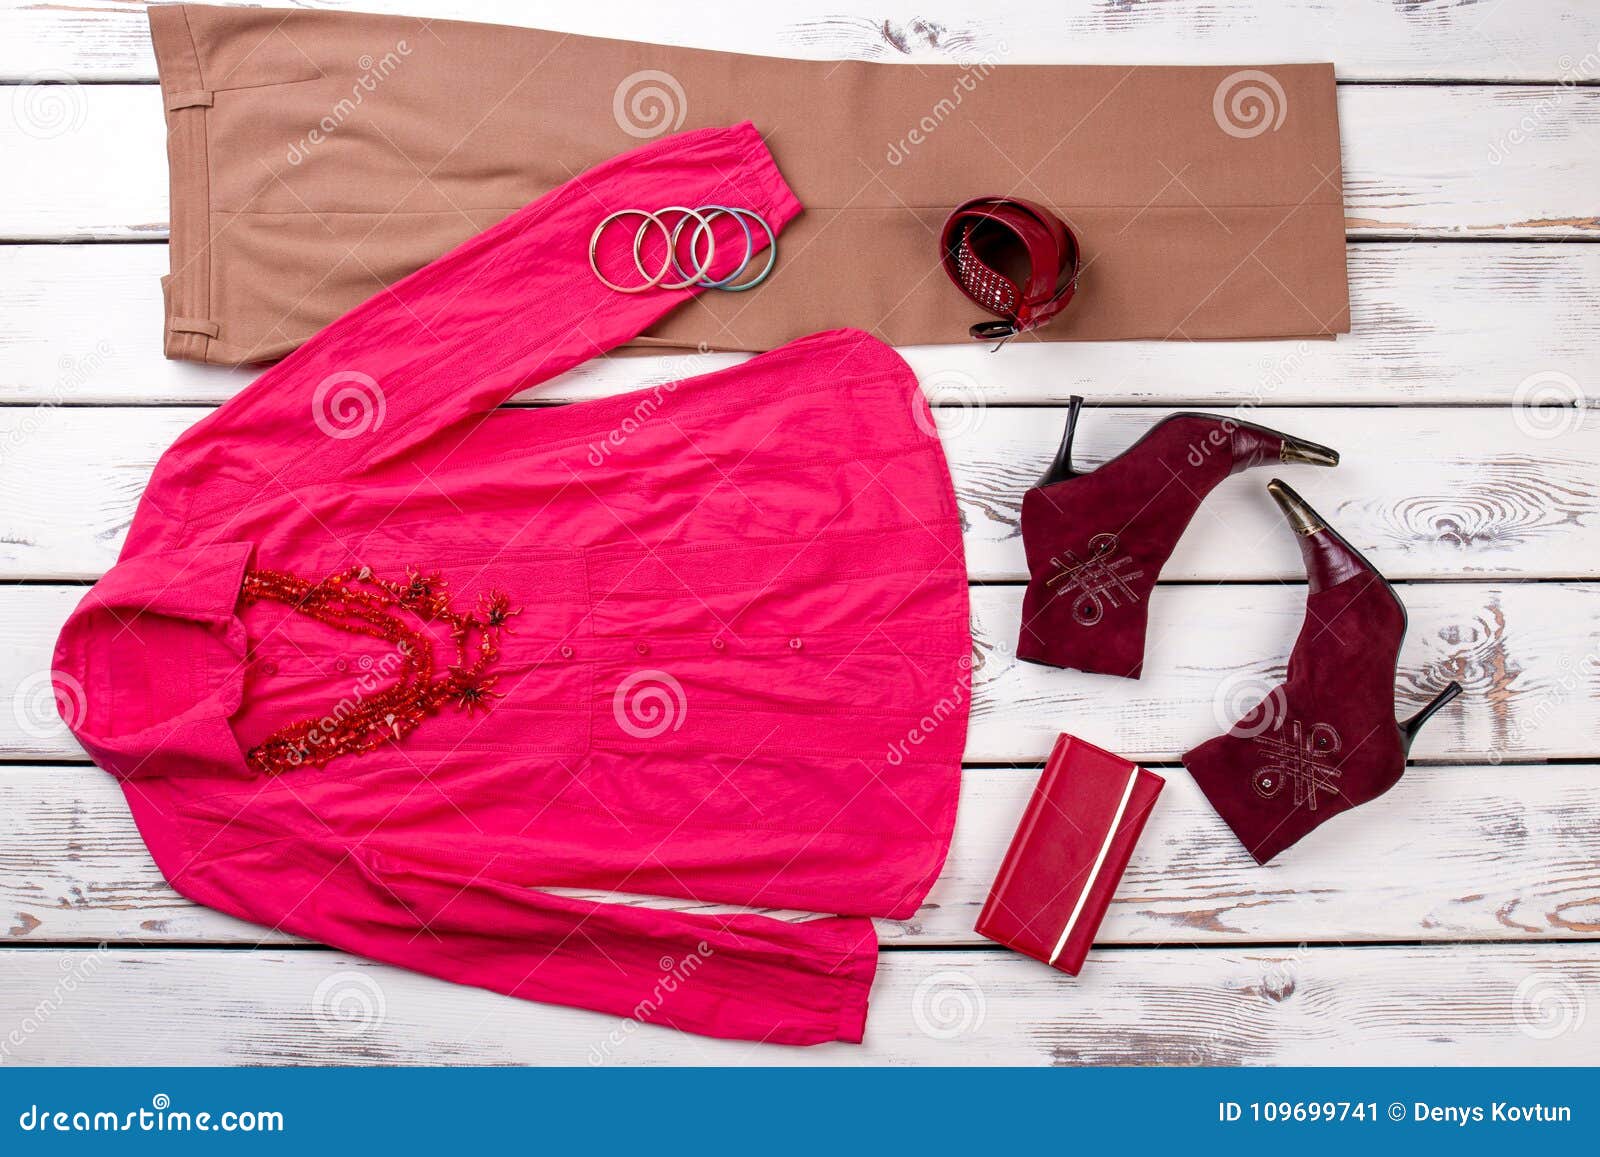 Set of Female Clothes and Accessories. Stock Image - Image of clothing ...